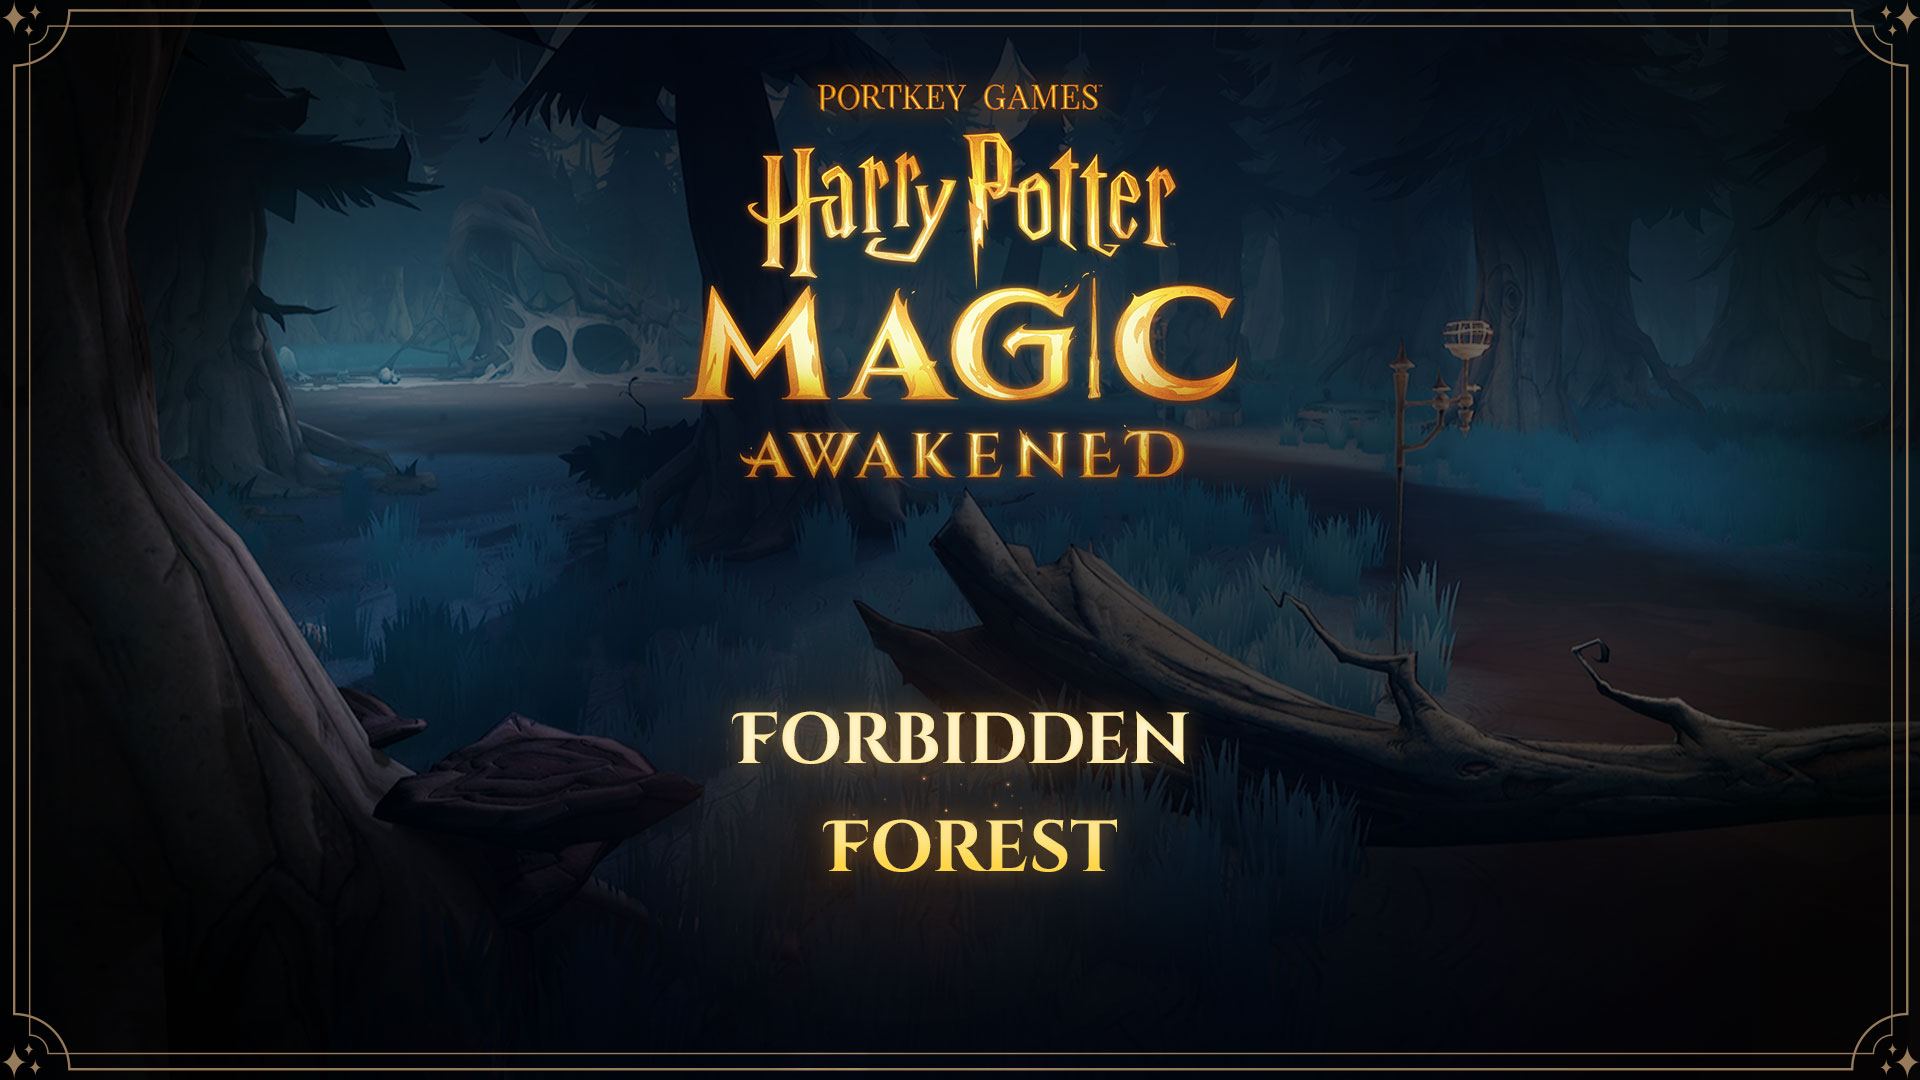 Harry Potter: Magic Awakened Global Release Scheduled for June 27, 2023